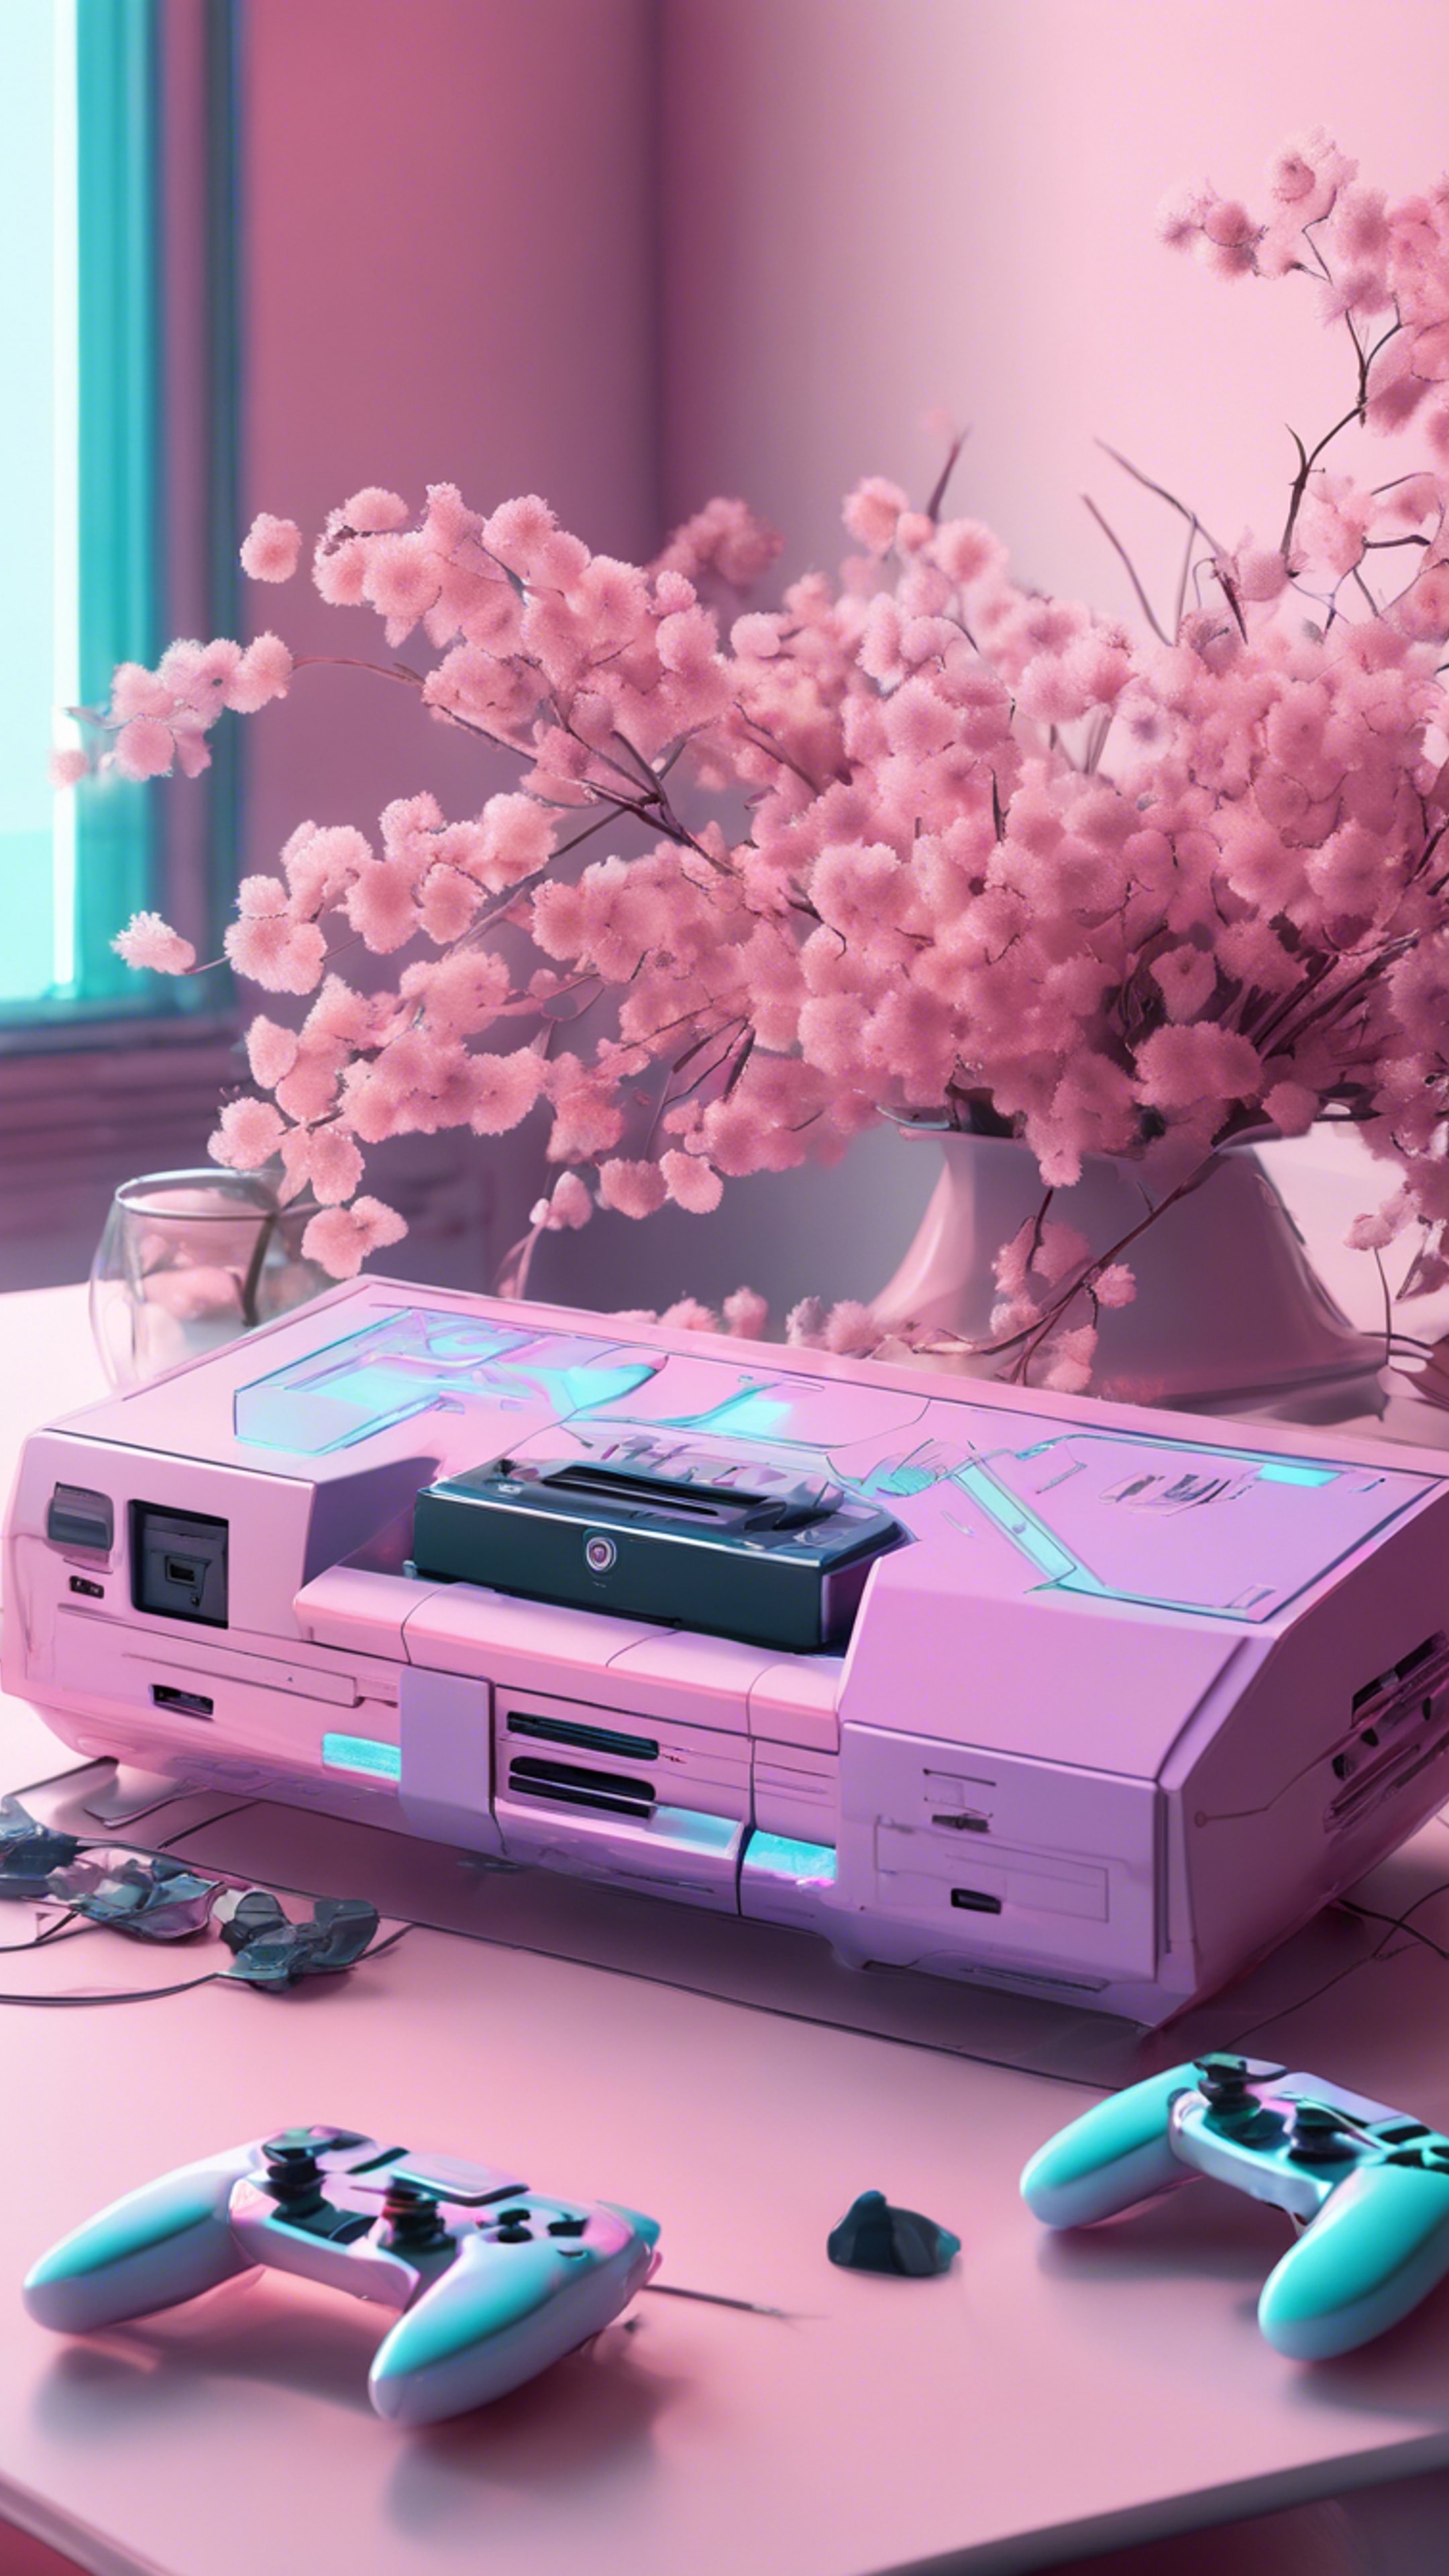 A pastel colored gaming console on a white table next to soft colored flowers in a daylight room. Tapeta[43bf14bcce304acdbb24]